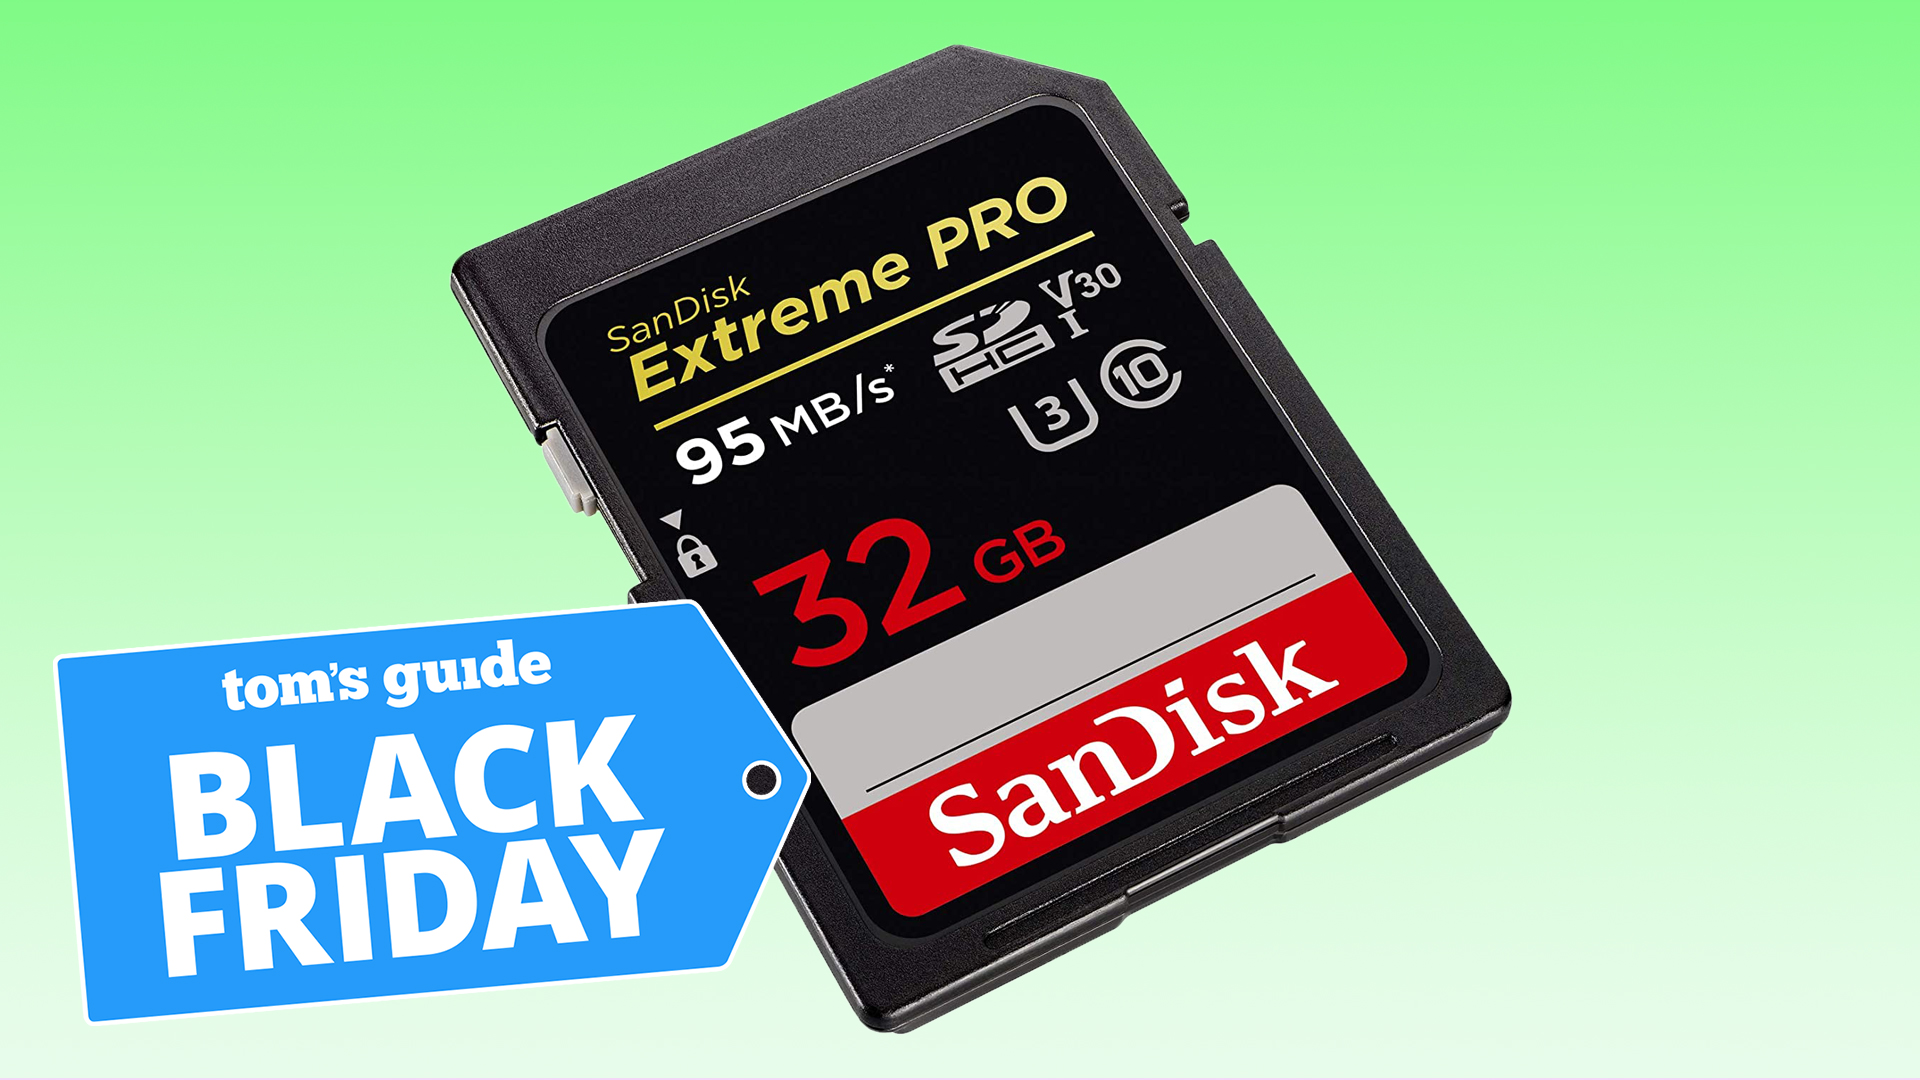 Sandisk Extreme Pro 32GB SD Card